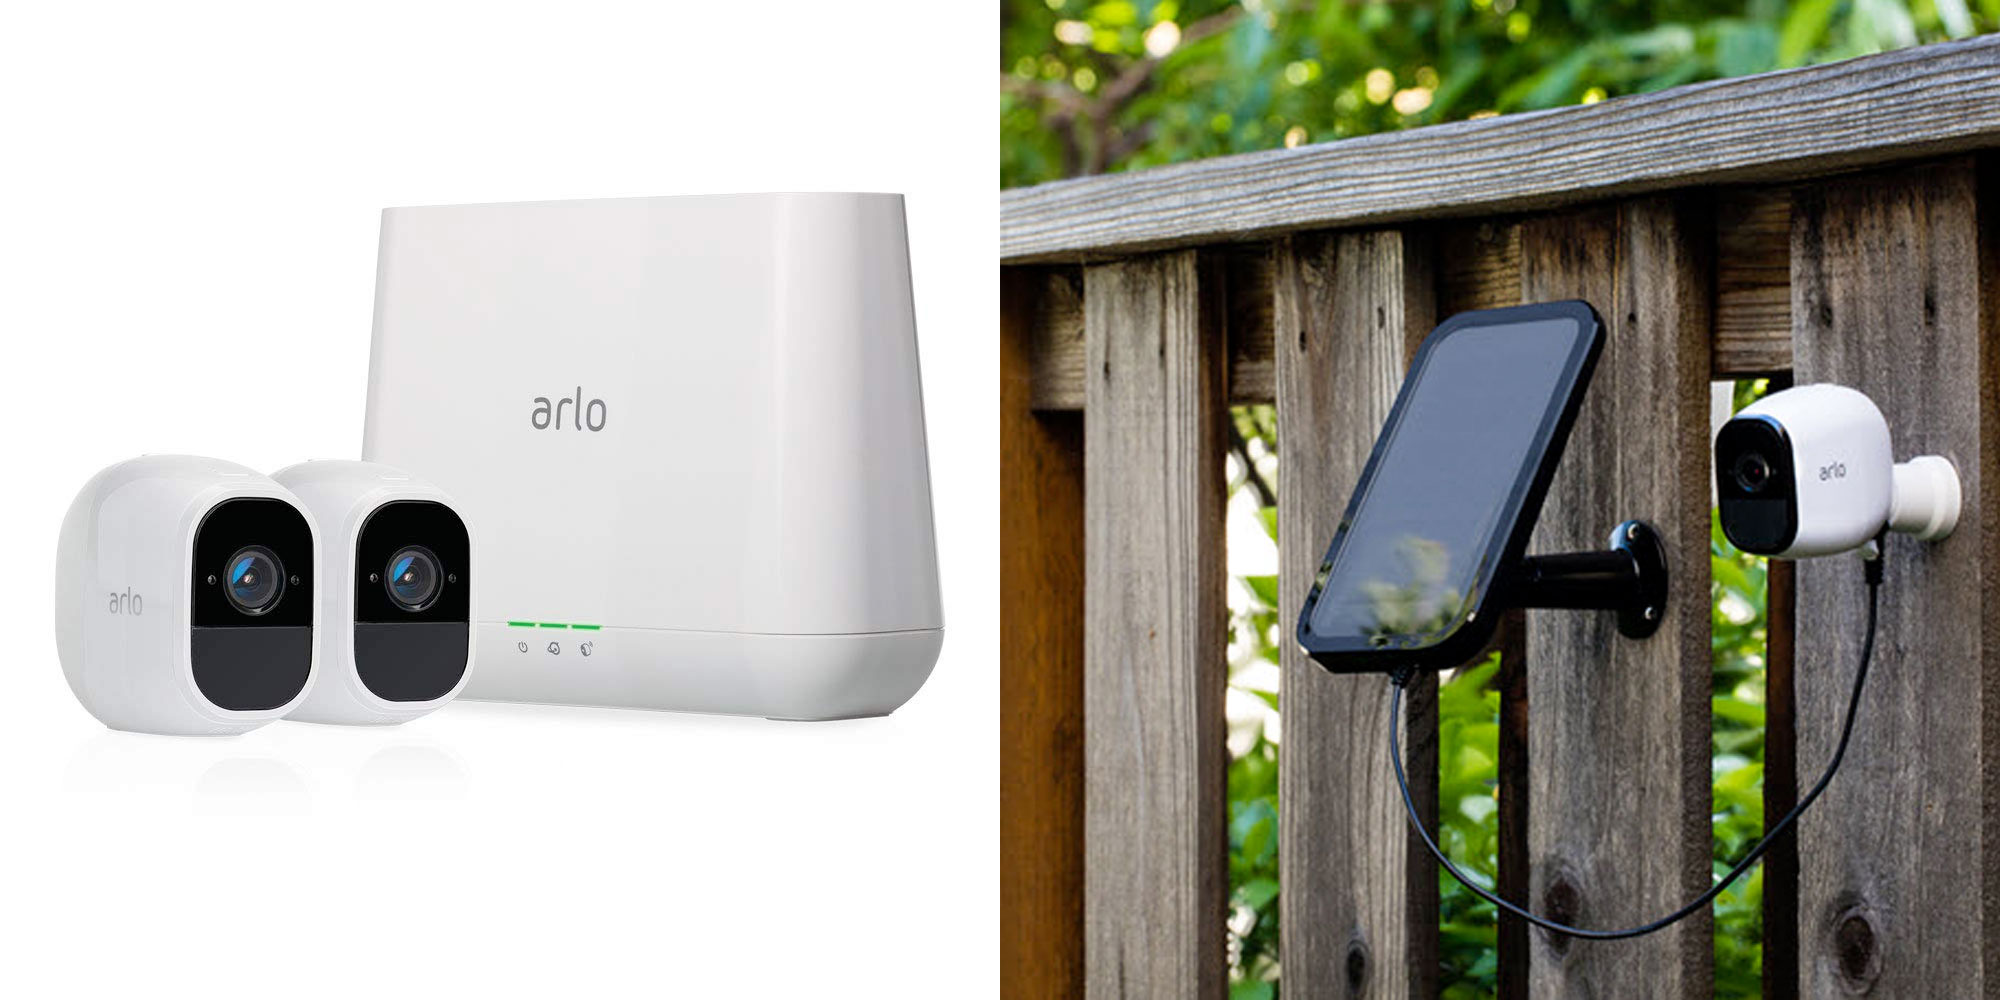 NETGEAR's Arlo Pro 2 Security System w/ two cameras + solar panel hits 433 (510 value) 9to5Toys